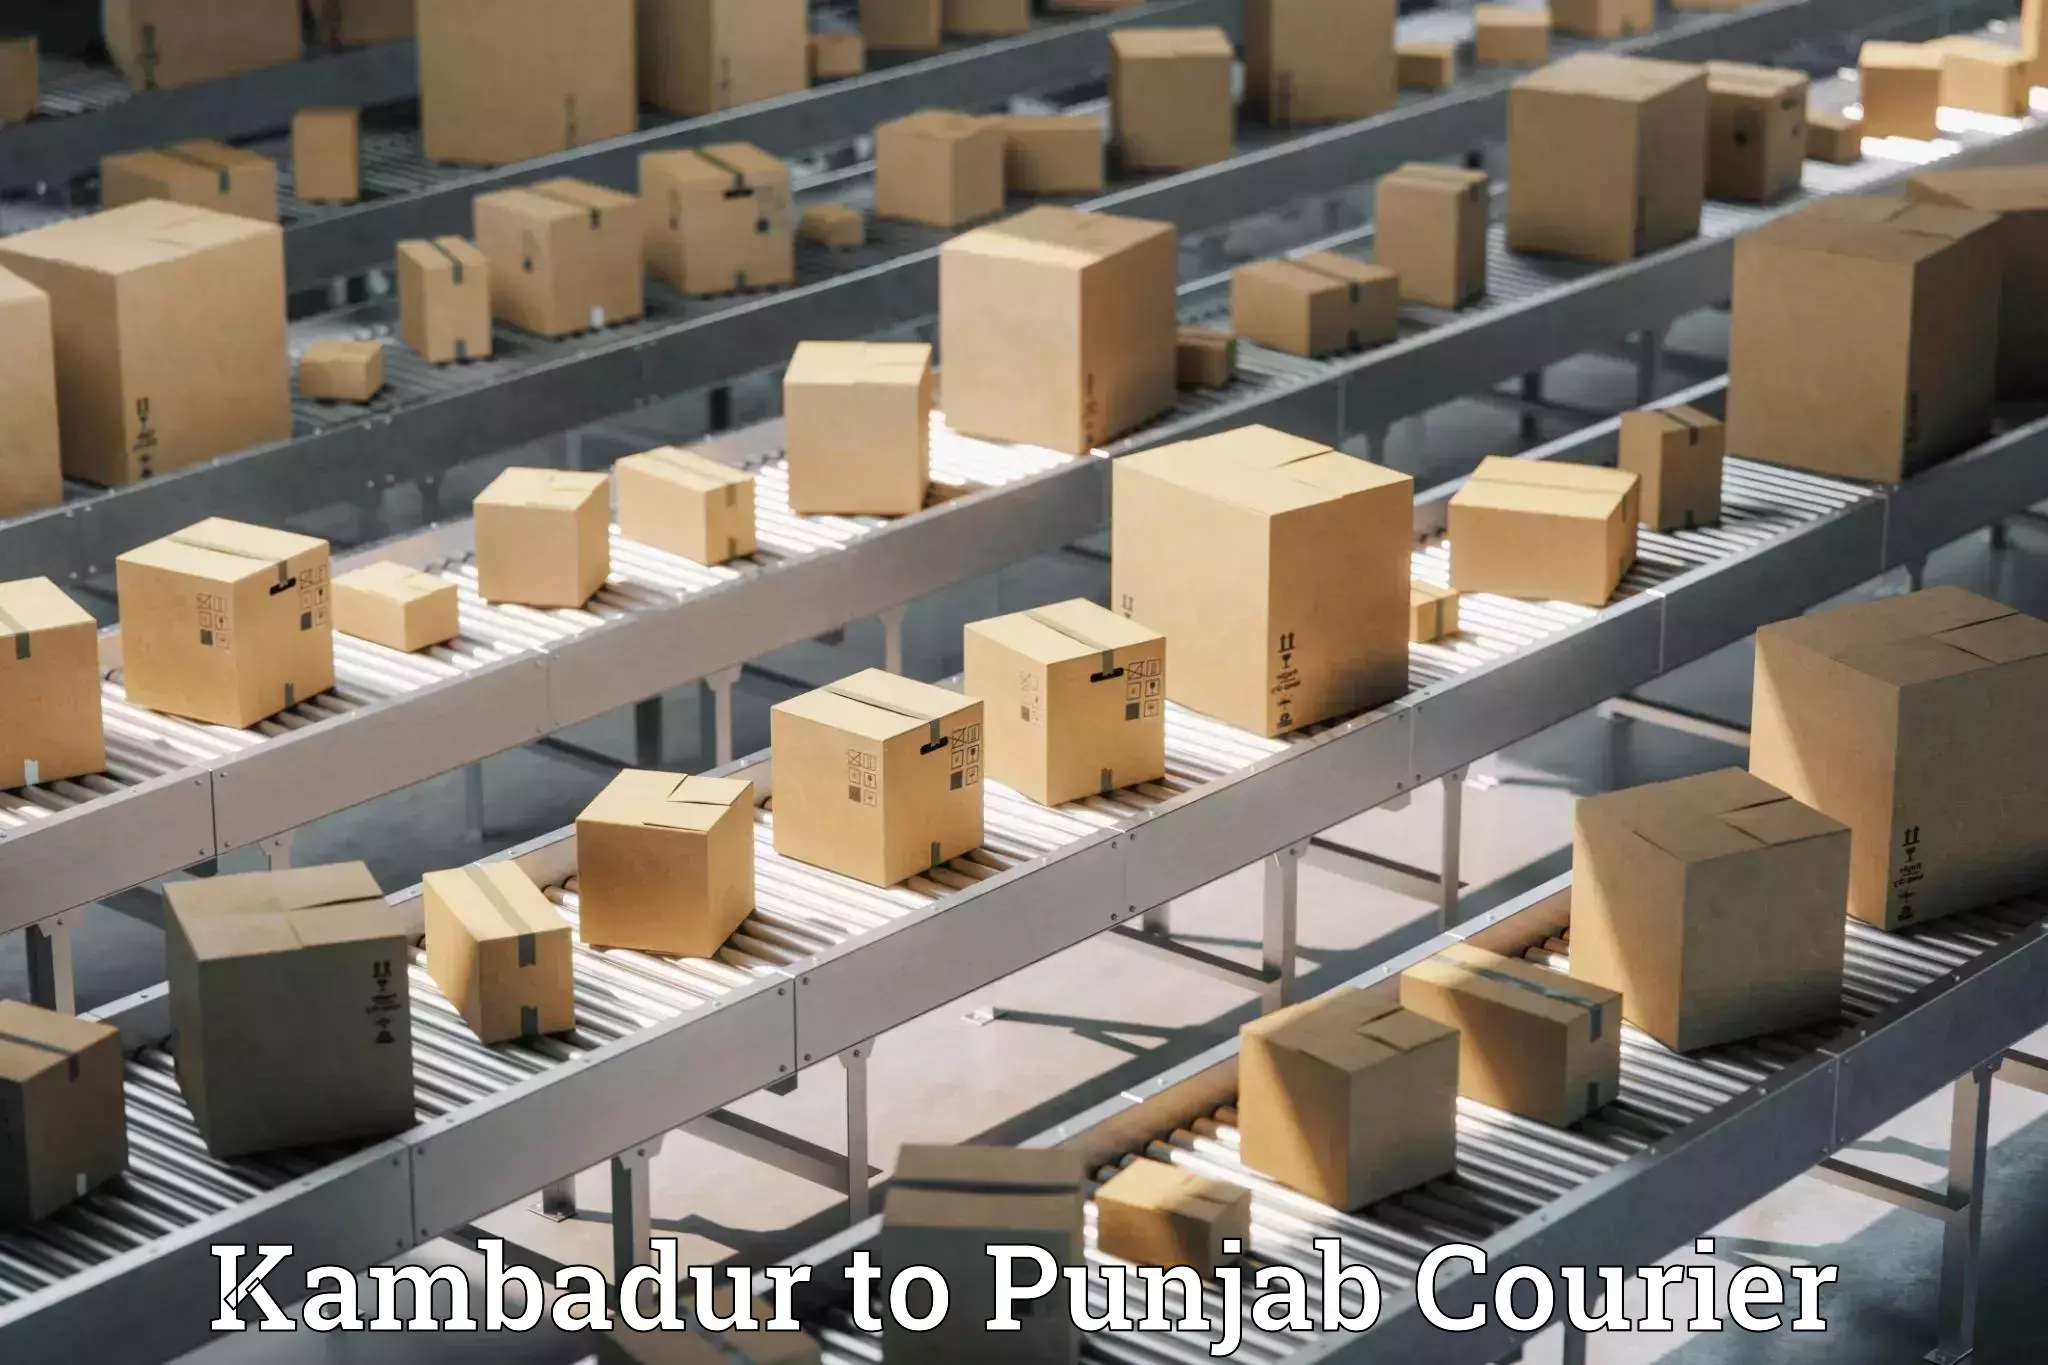 24-hour courier services Kambadur to Patiala